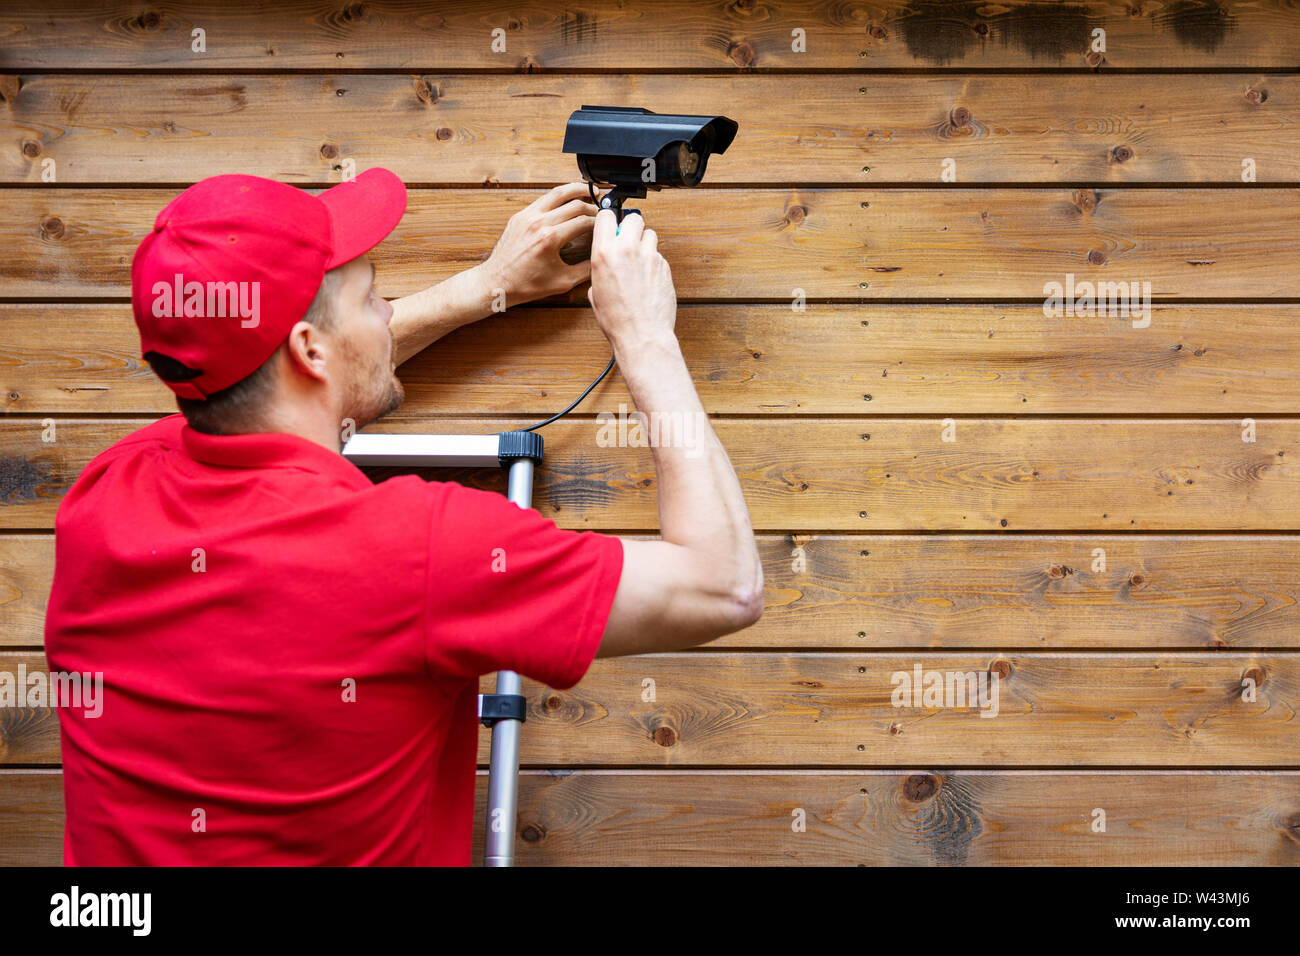 home security - man installing outdoor surveillance camera on wooden wall copy space Stock Photo